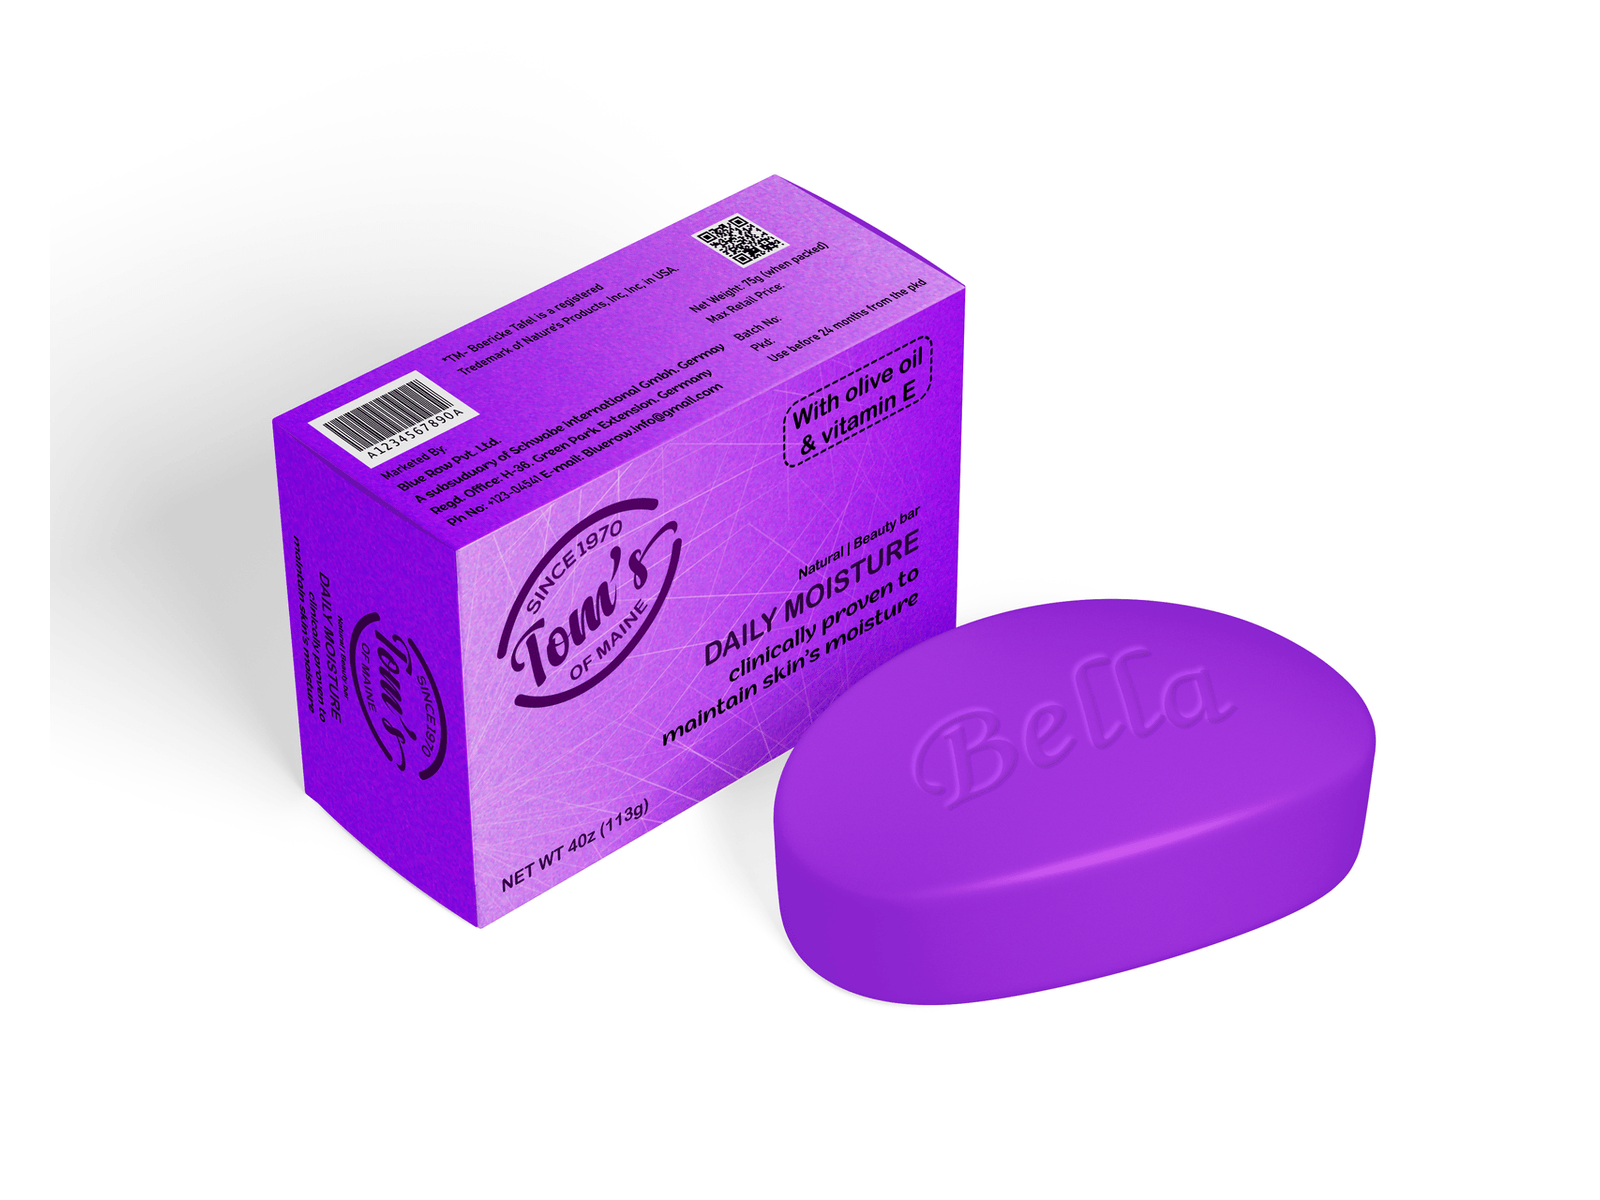 Soap packaging Design | Cosmetics product packaging Deisgn dribbble dribbble best shot dribbble invite logo packaging design product packaging soap design soap packaging